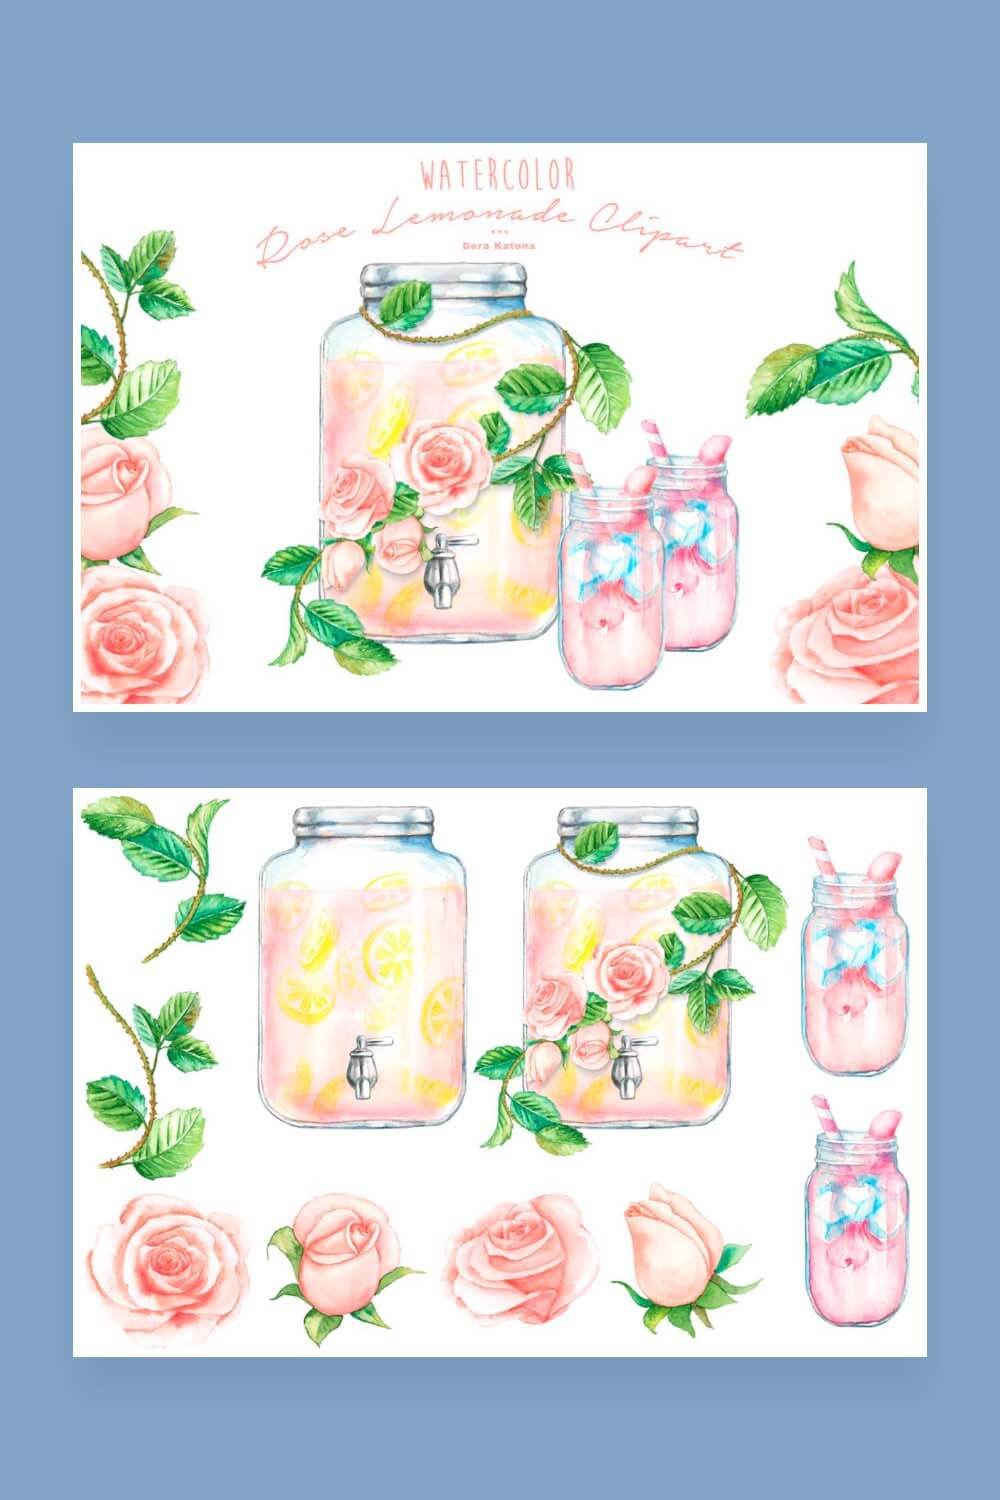 Two pictures with sets of watercolor roses on cans of lemonade.